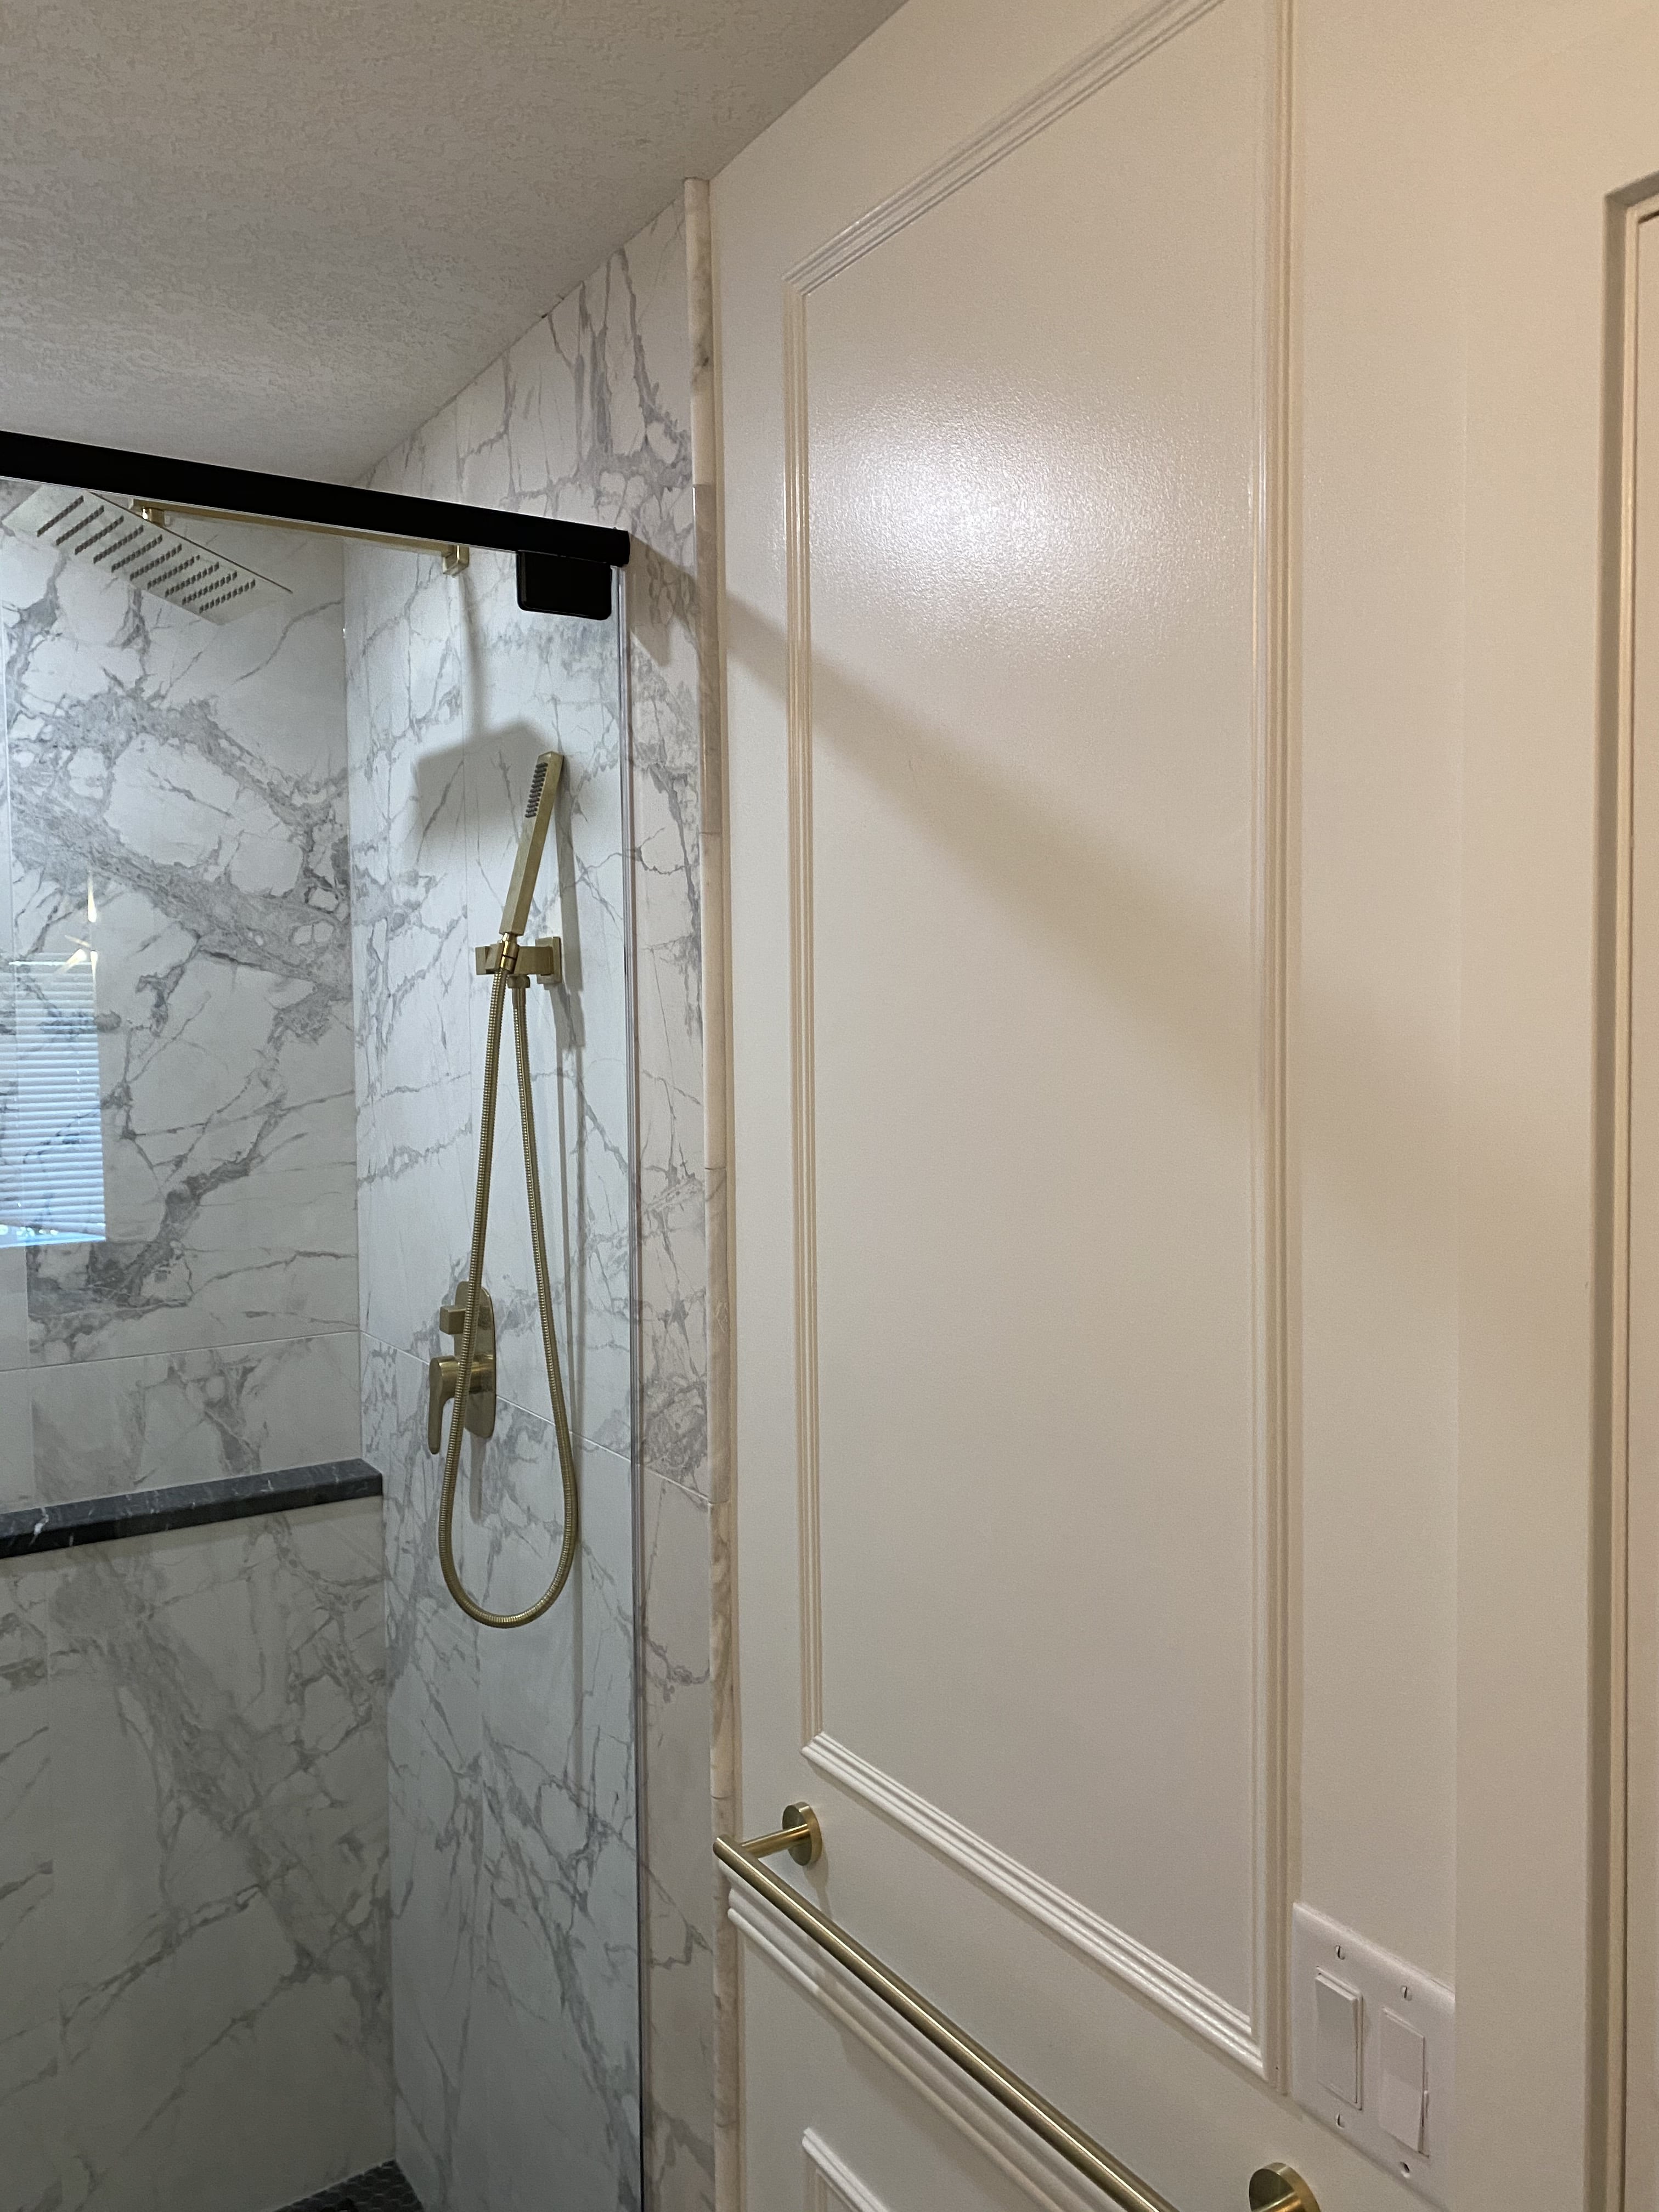 The shower includes a black granite shampoo ledge and curb with a hinged glass door.